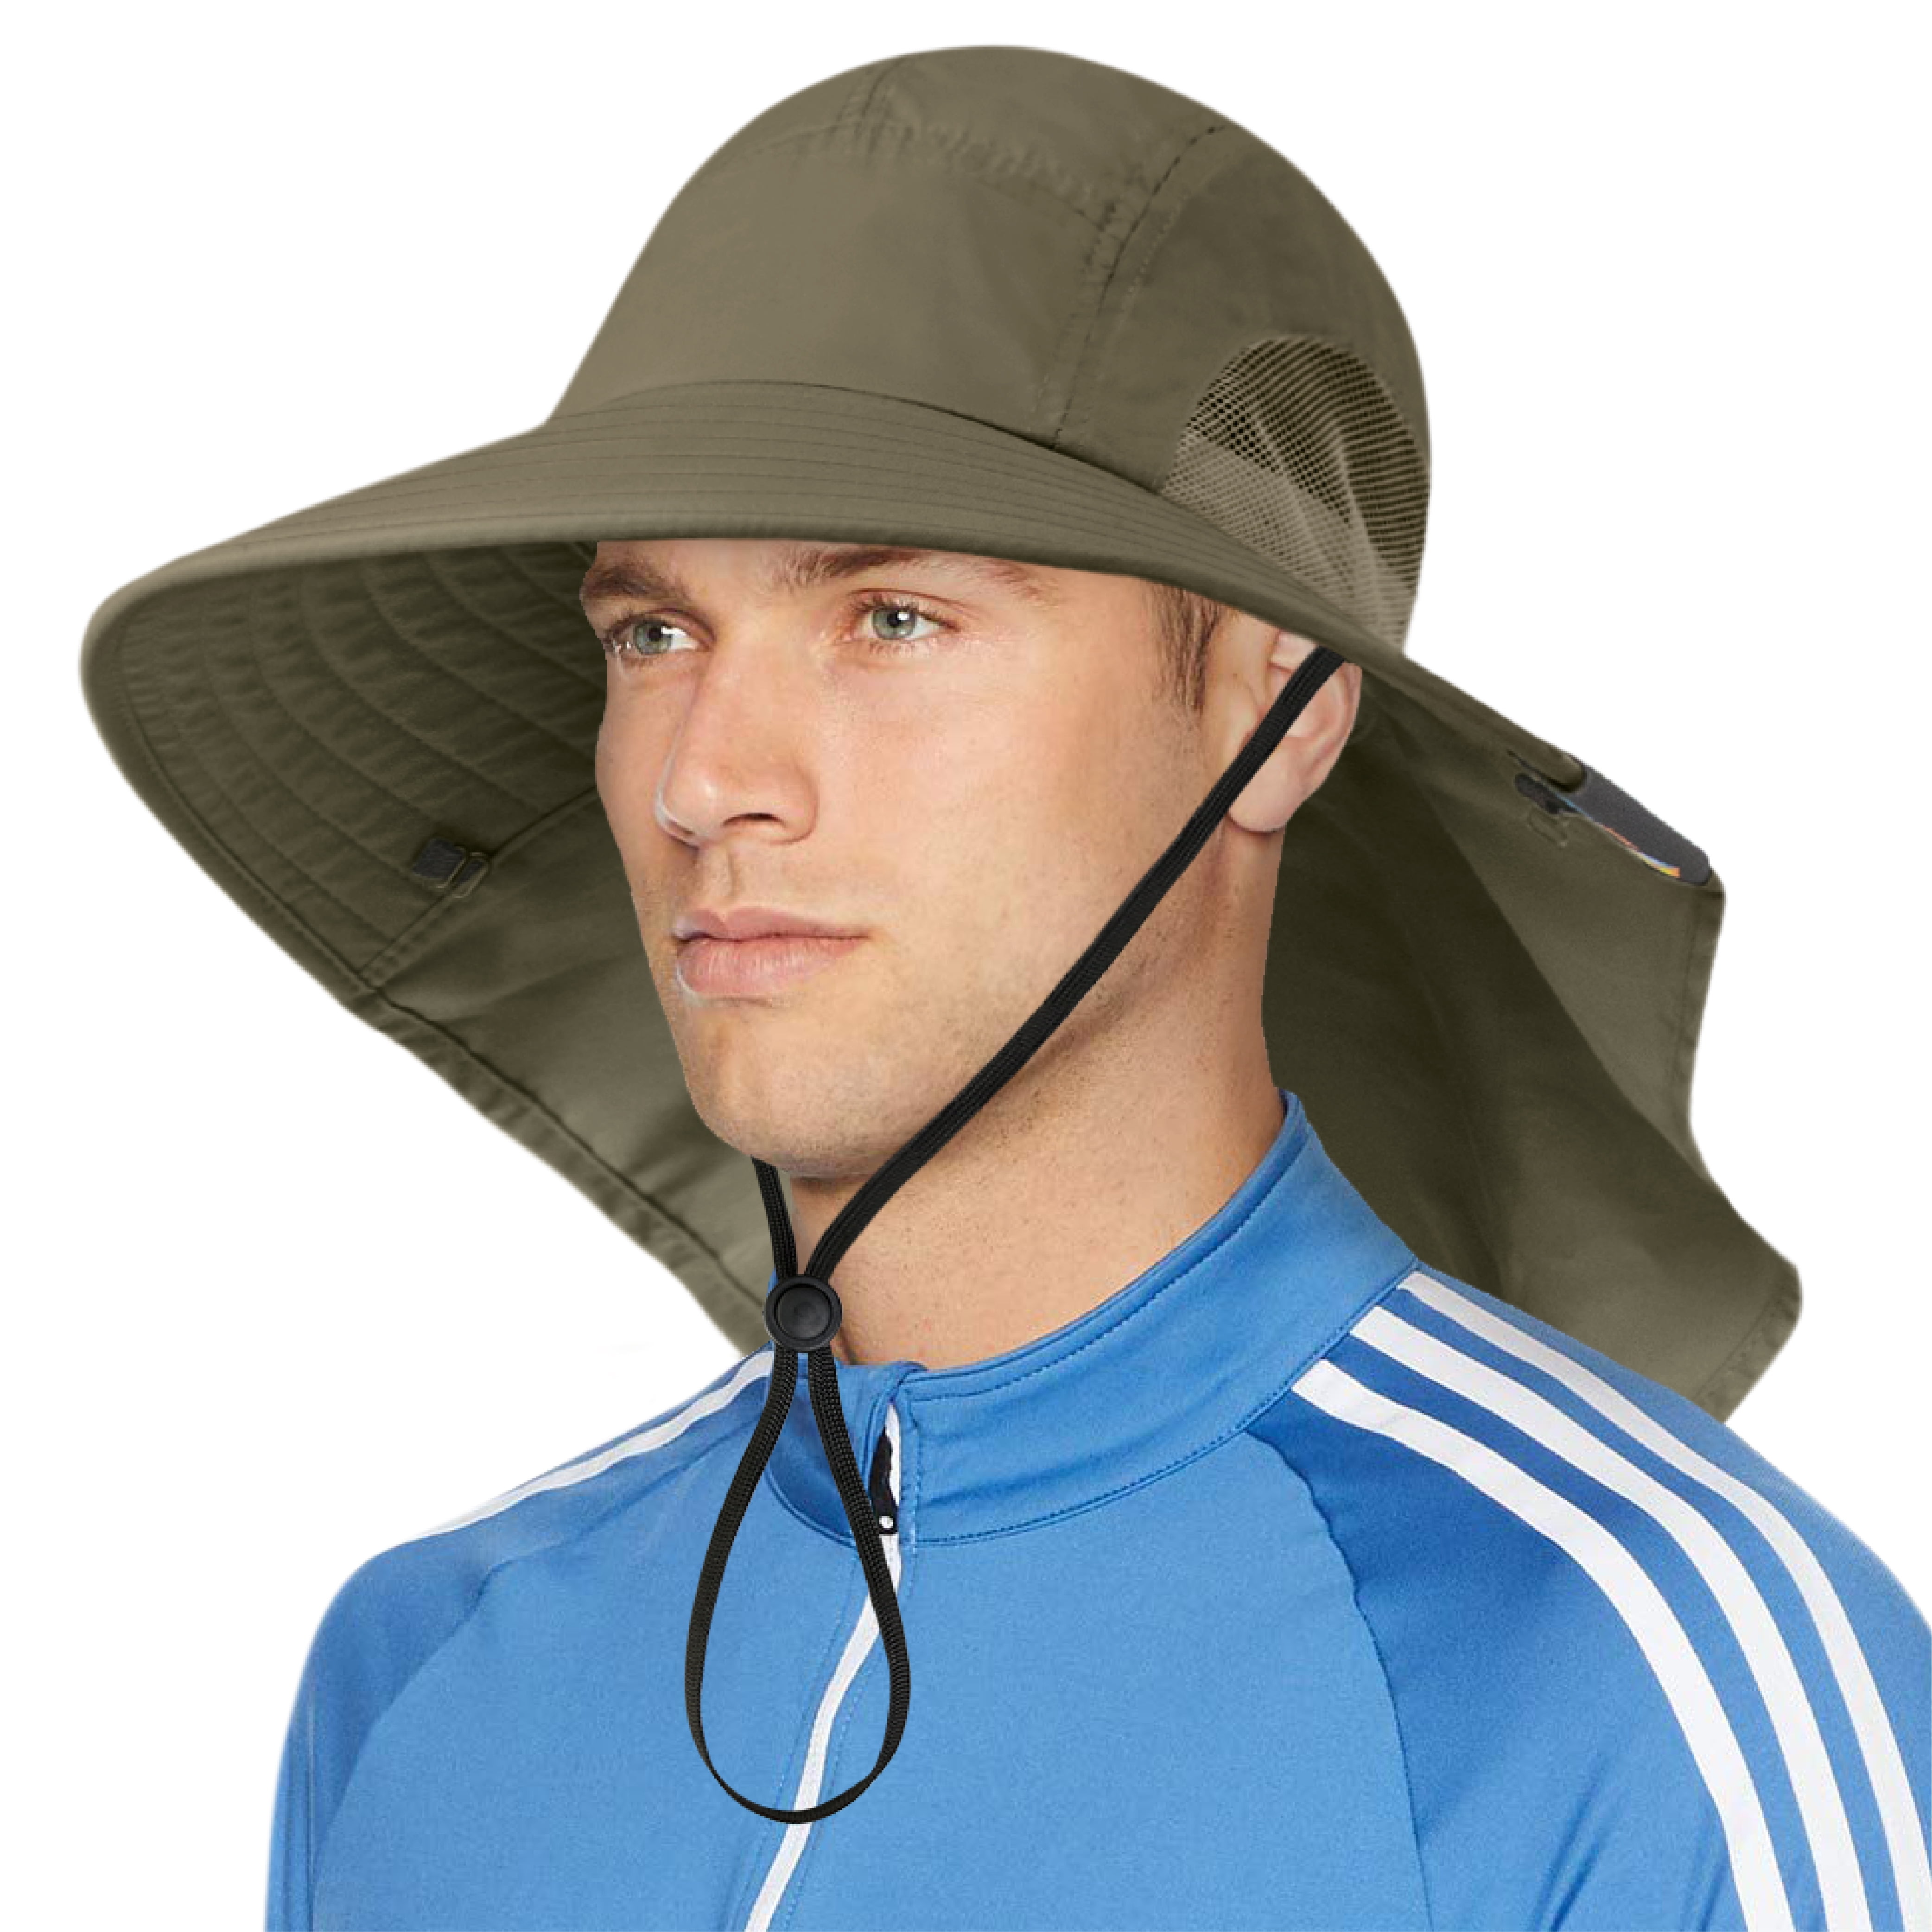 SUN CUBE Sun Cap Fishing Hat with Neck Face Cover Flap Sun Protection Cap with Flap for Hiking Safari Men Women UPF50+ 